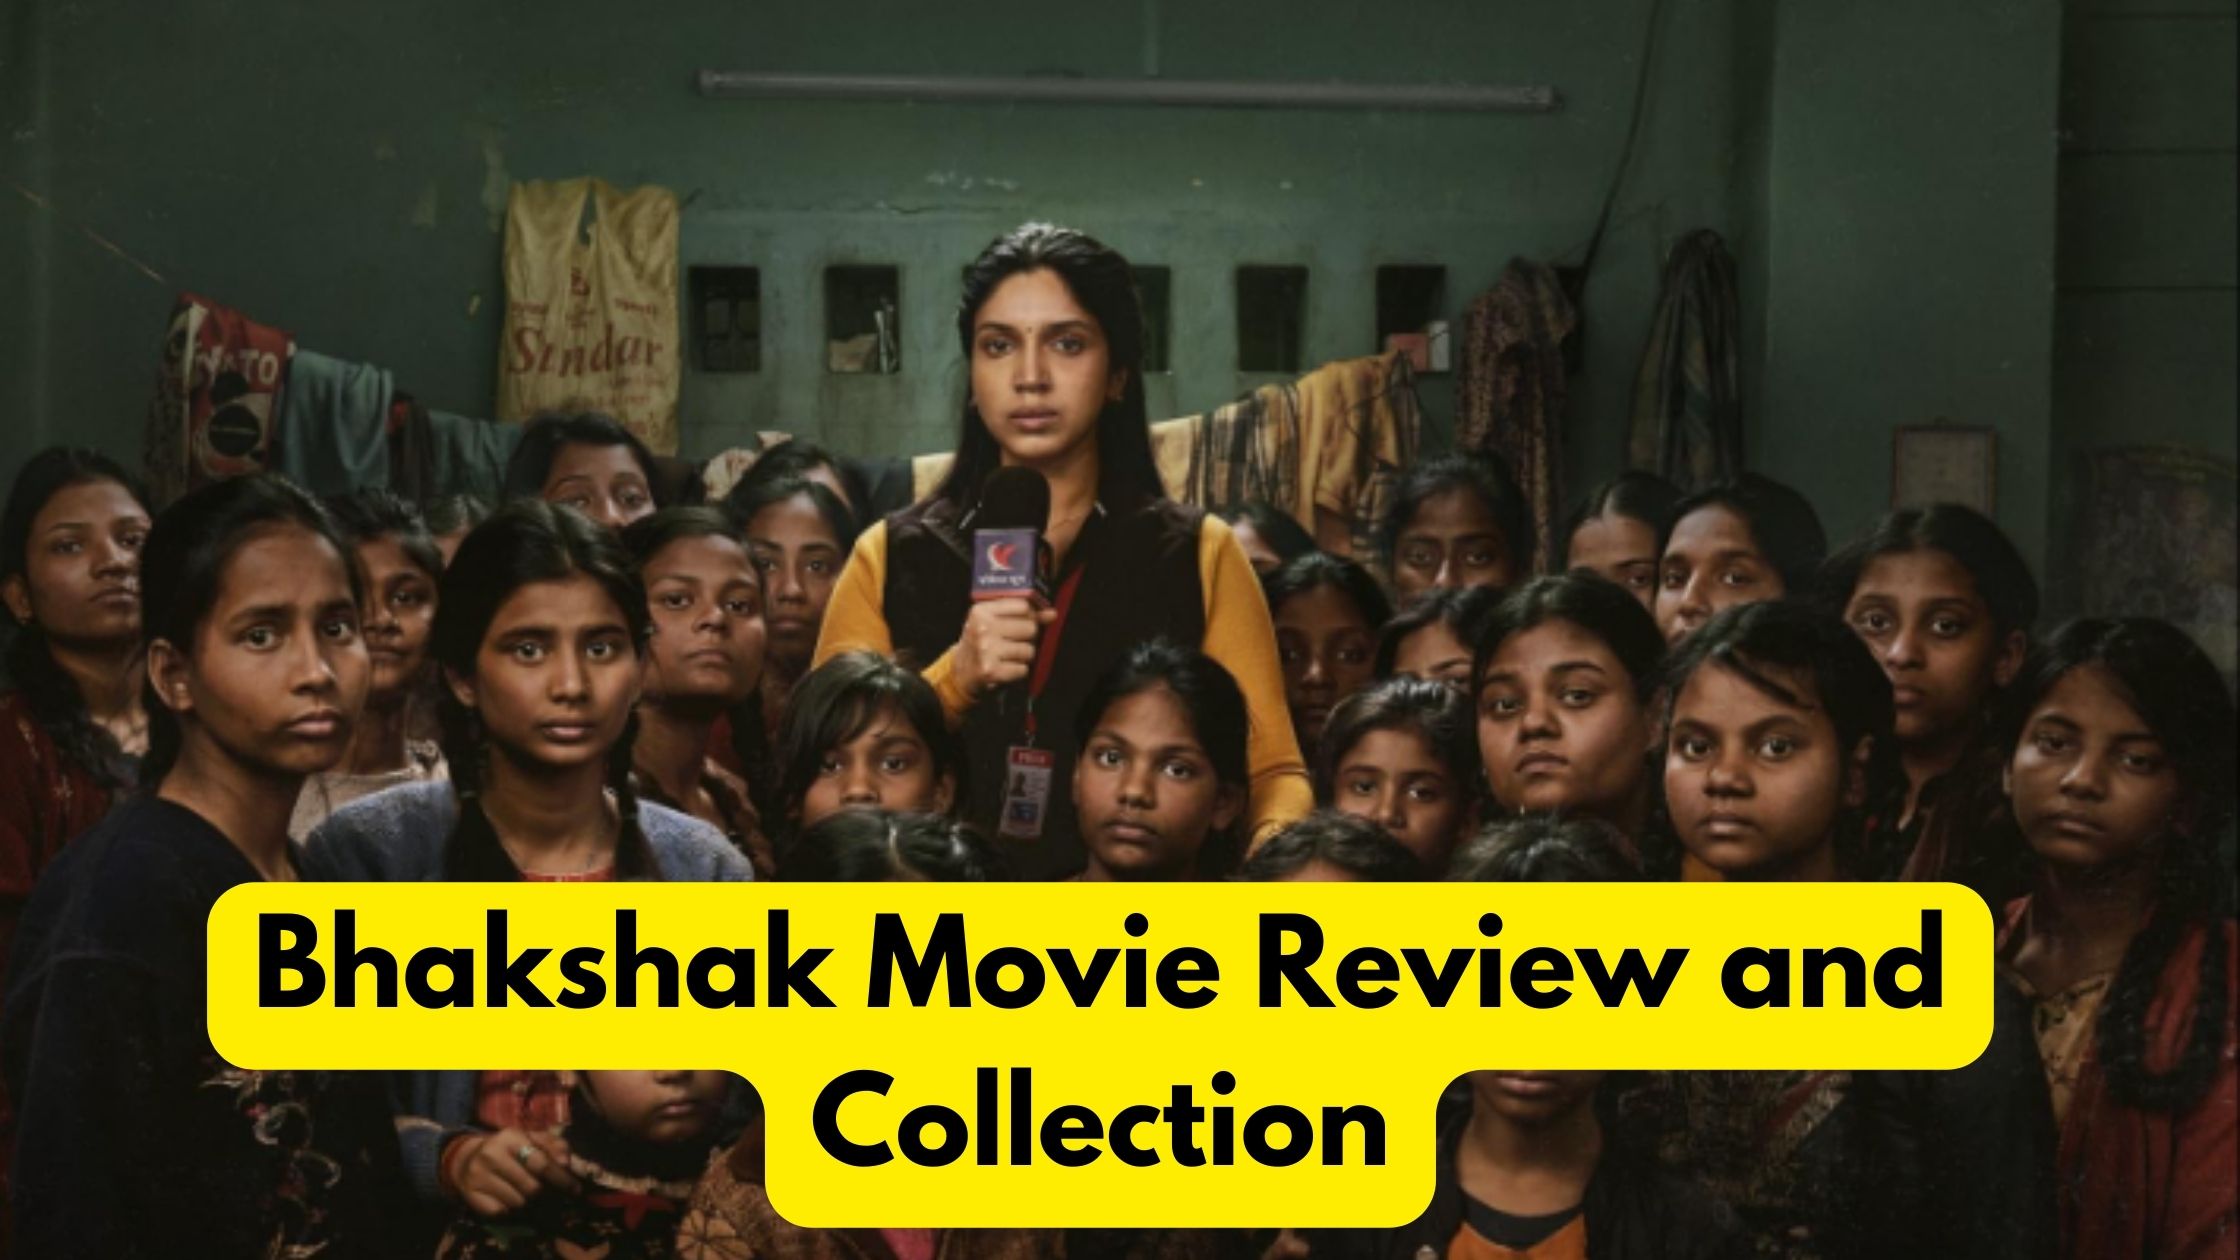 Bhakshak Movie Review and Collection